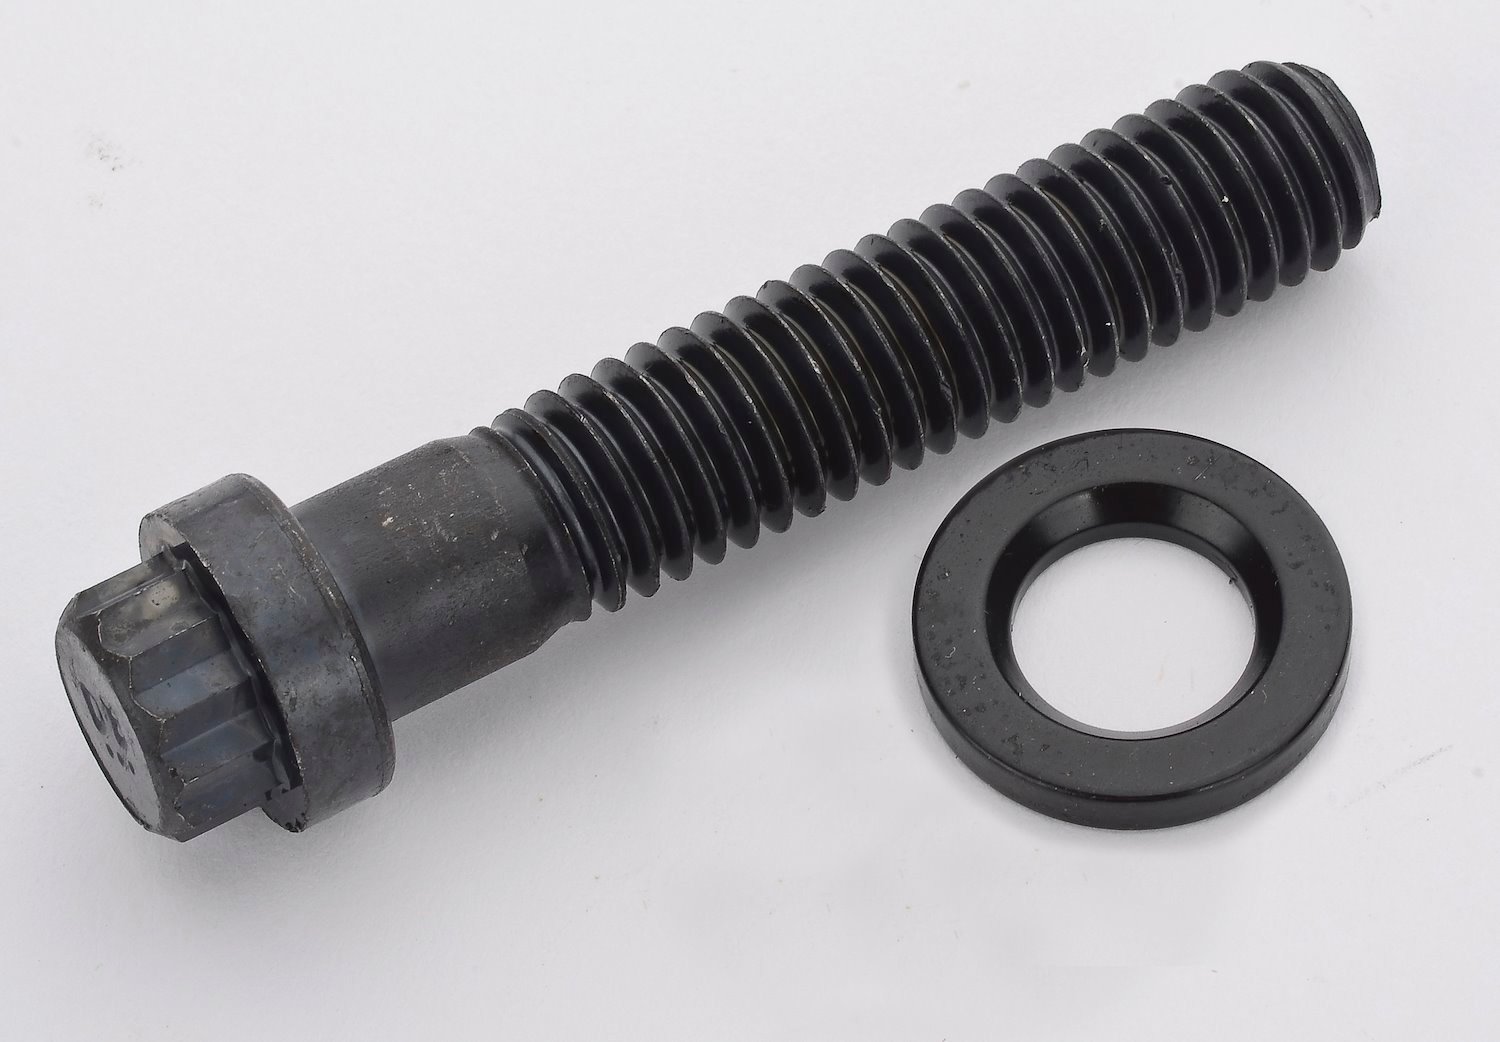 Oil Pump Bolt for Small Block Chevy using